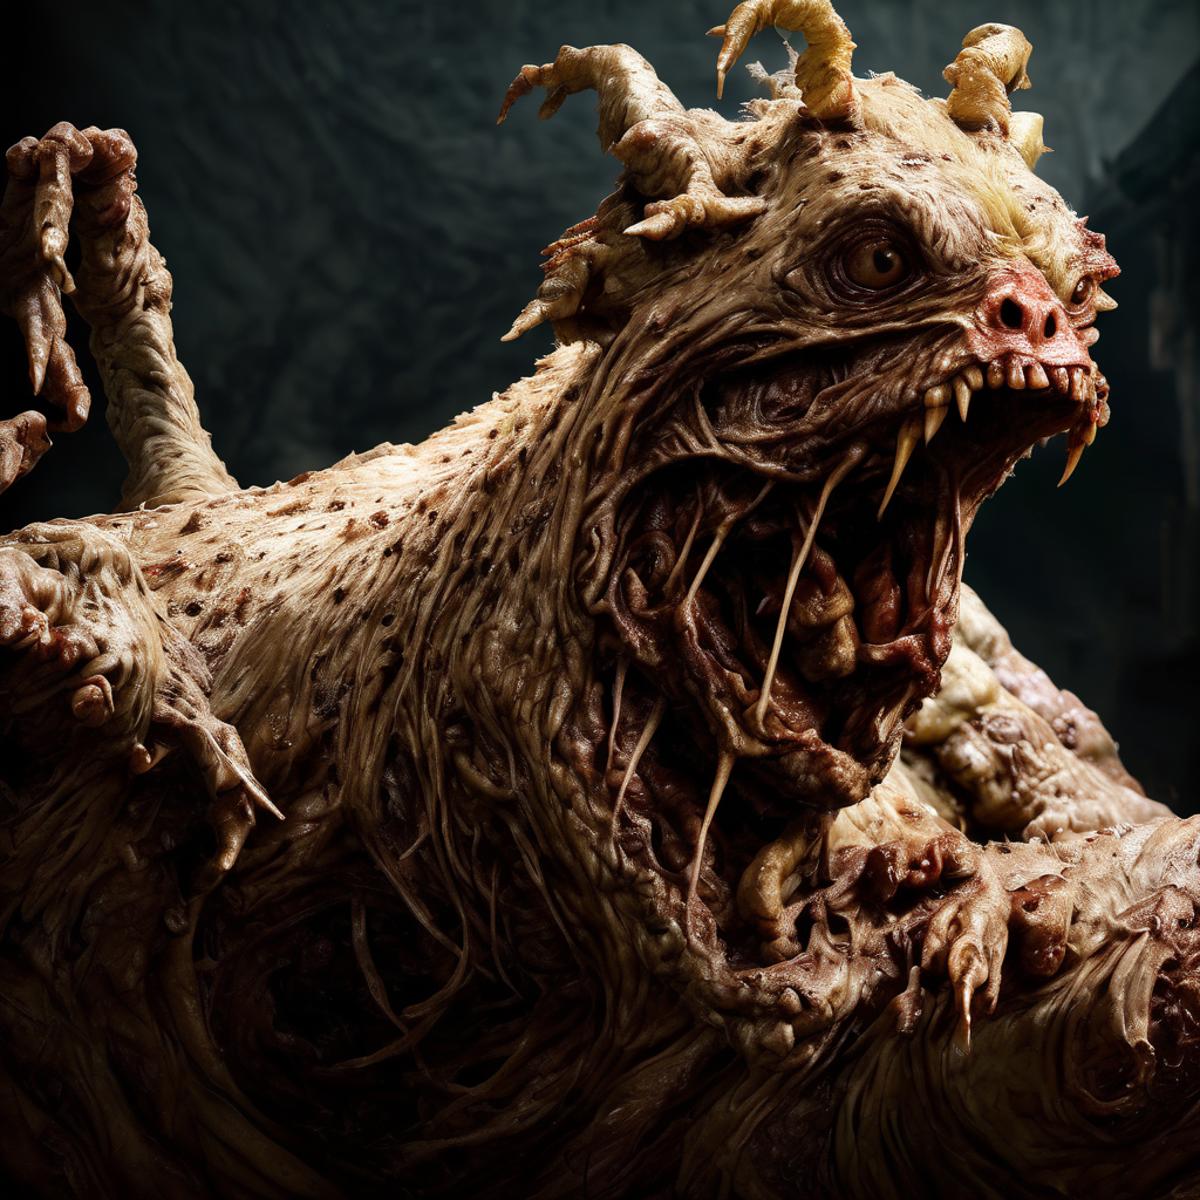 Realistic Abomination XL - DON’T CLICK!!! Body Horror image by NextMeal